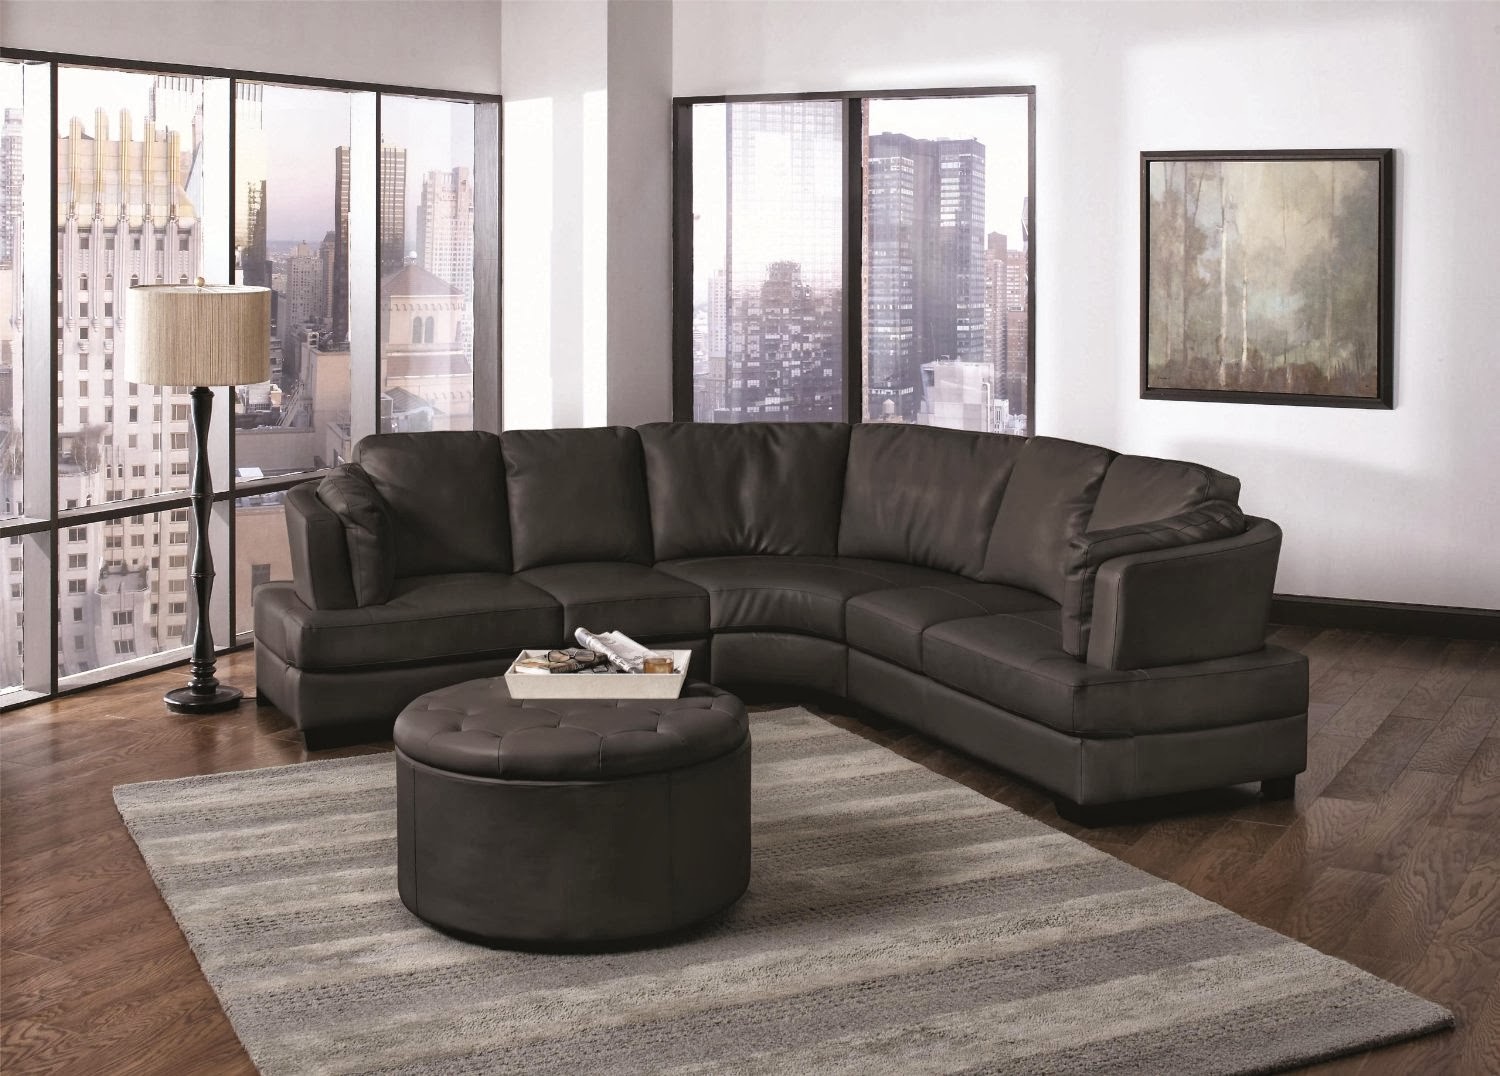 Buy Curved  Sofa  Online Curved  Leather Sectional  Sofa 